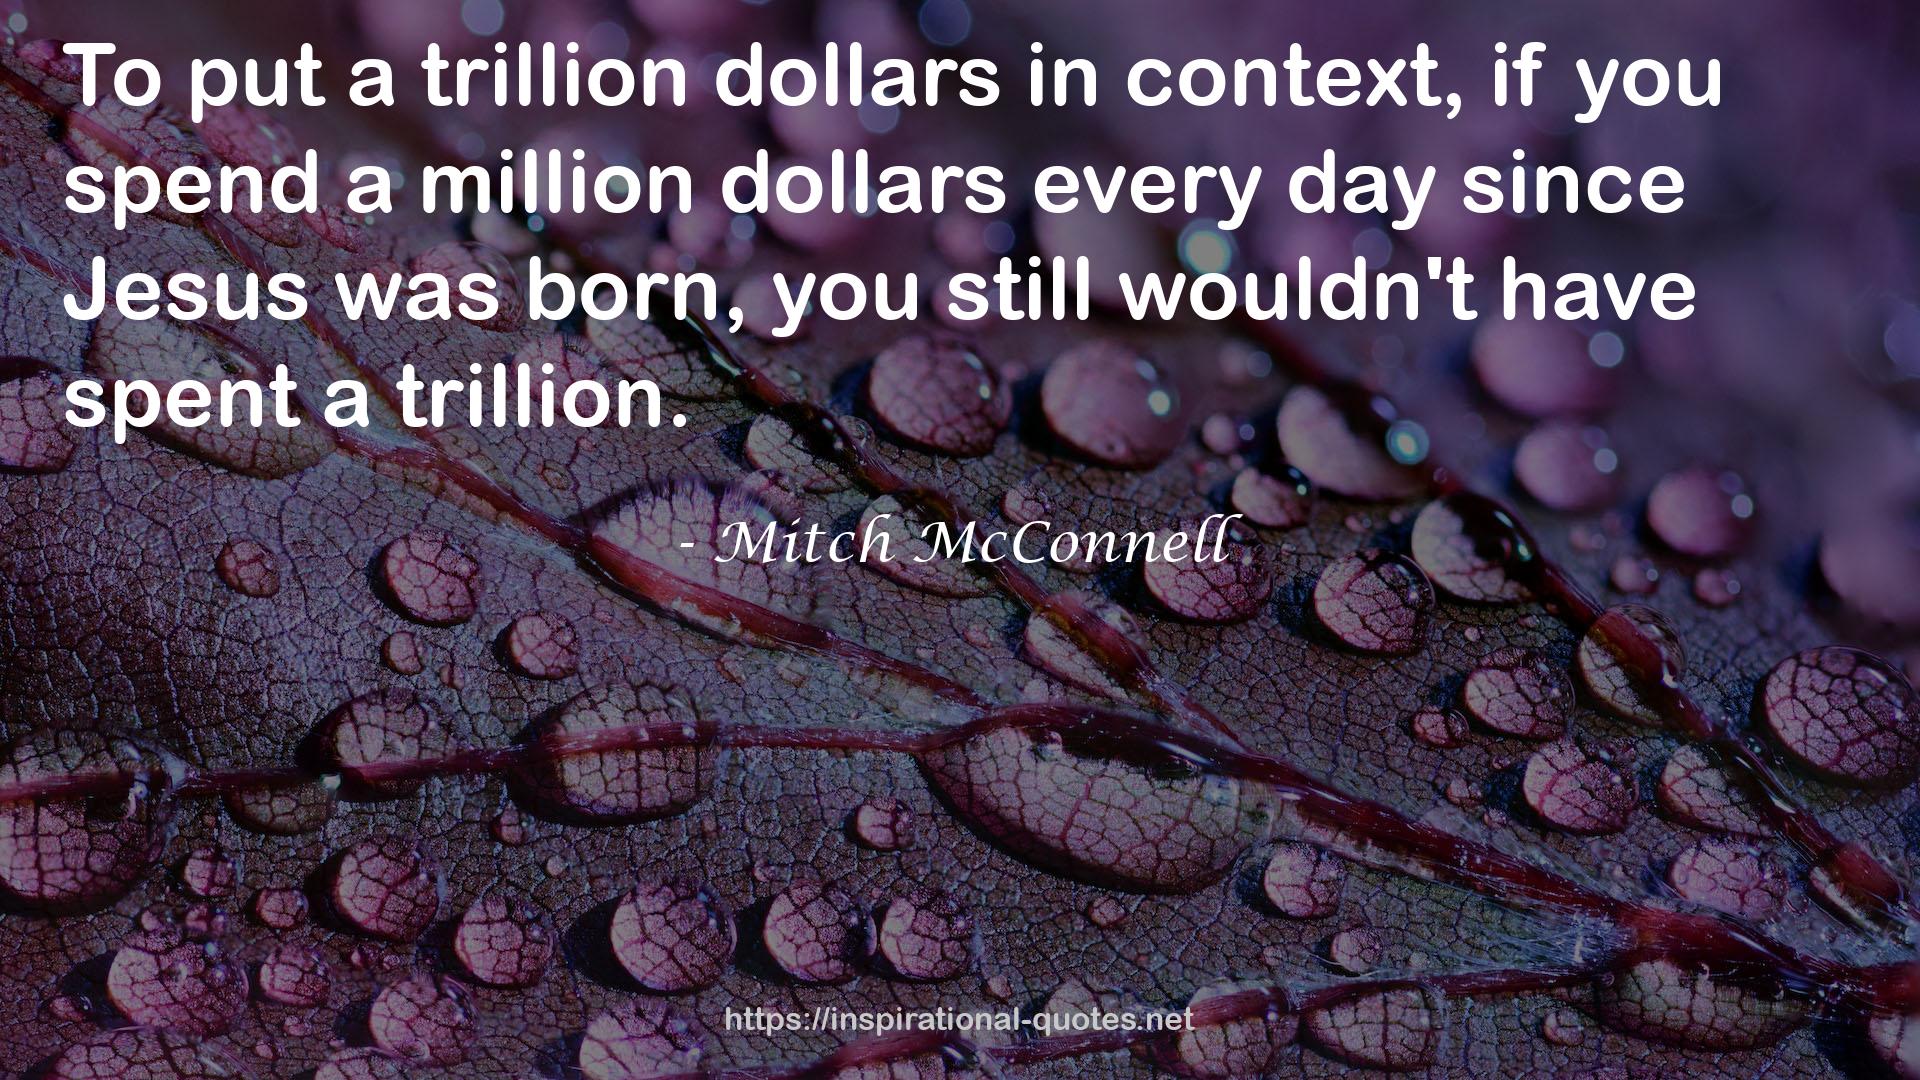 Mitch McConnell QUOTES